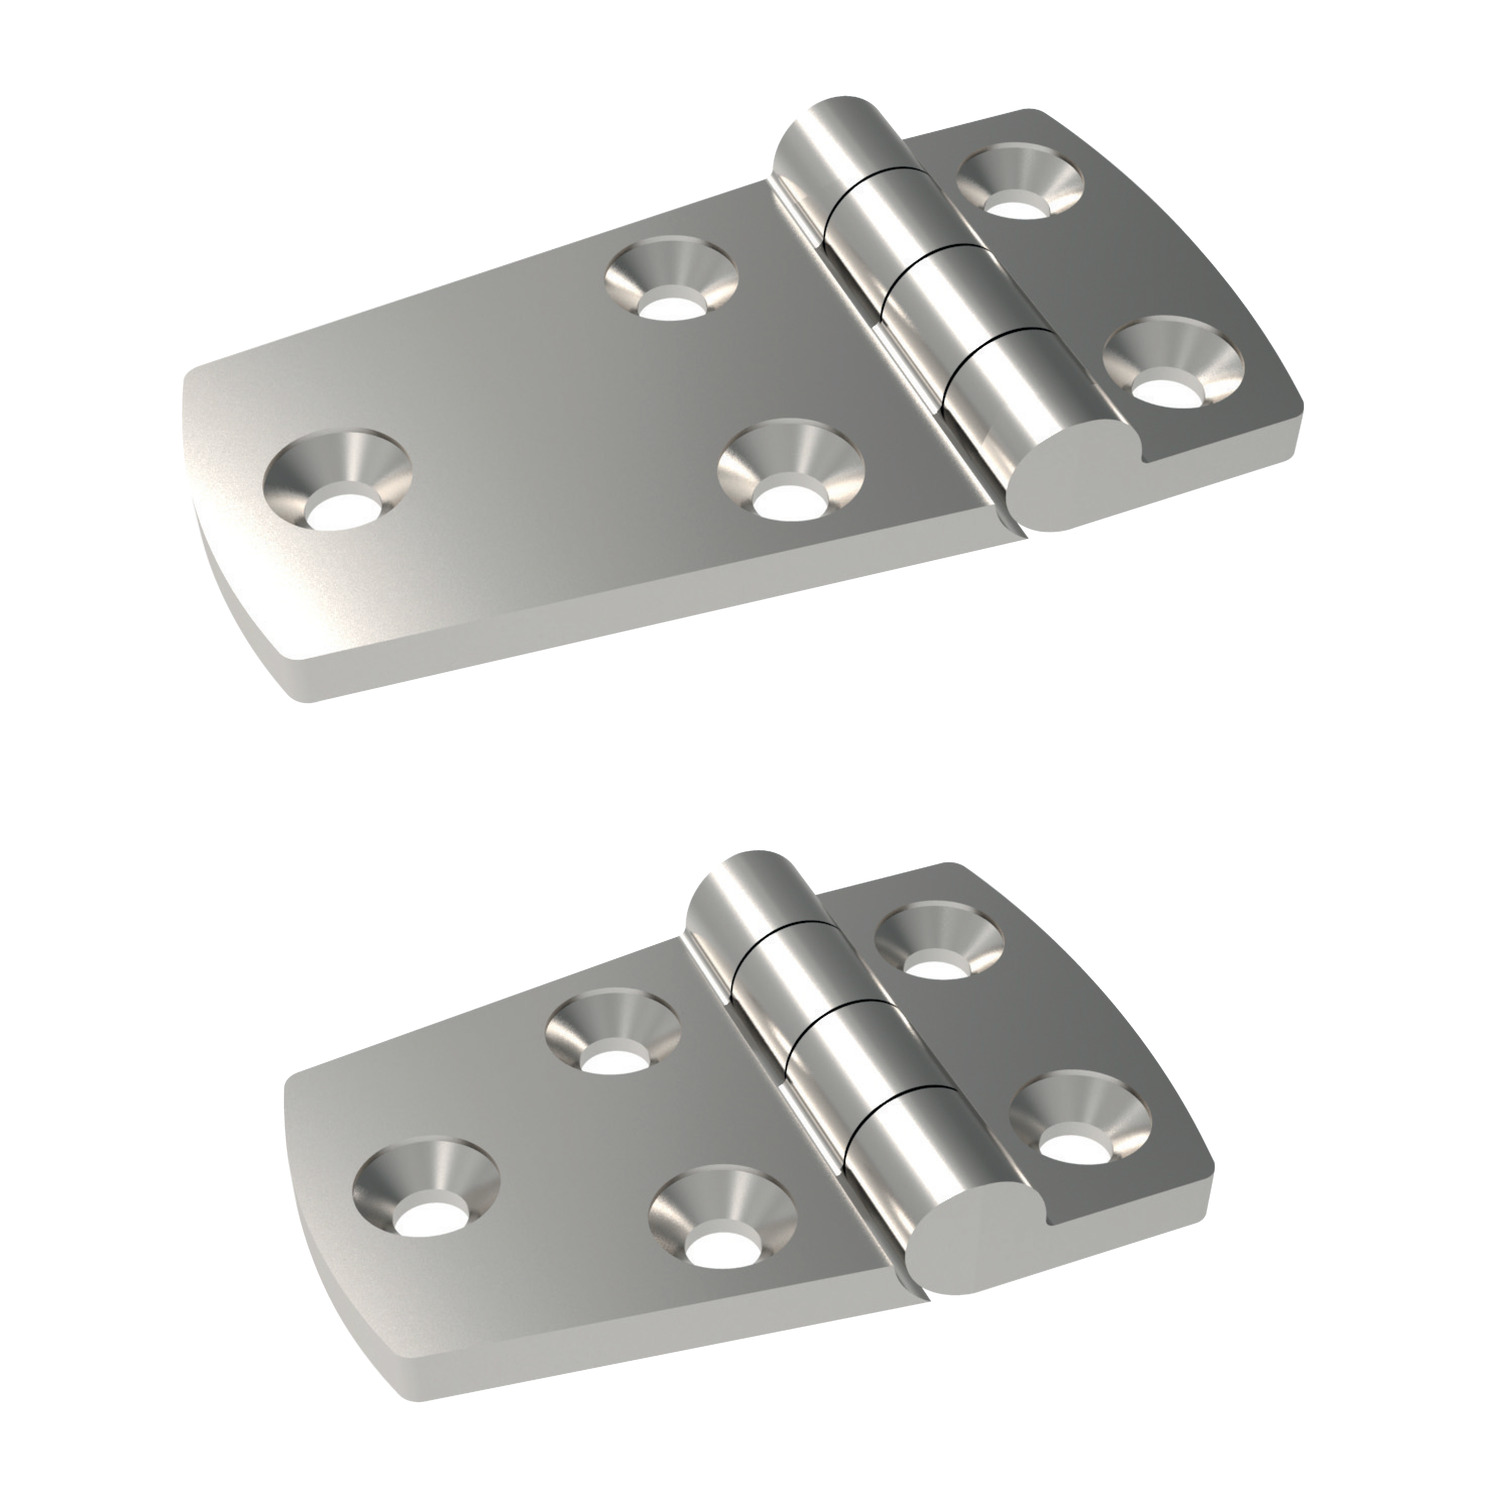 S0460.AC0007 Surface Mount - Leaf Hinges Screw mount - Stainless steel. 72 x 38